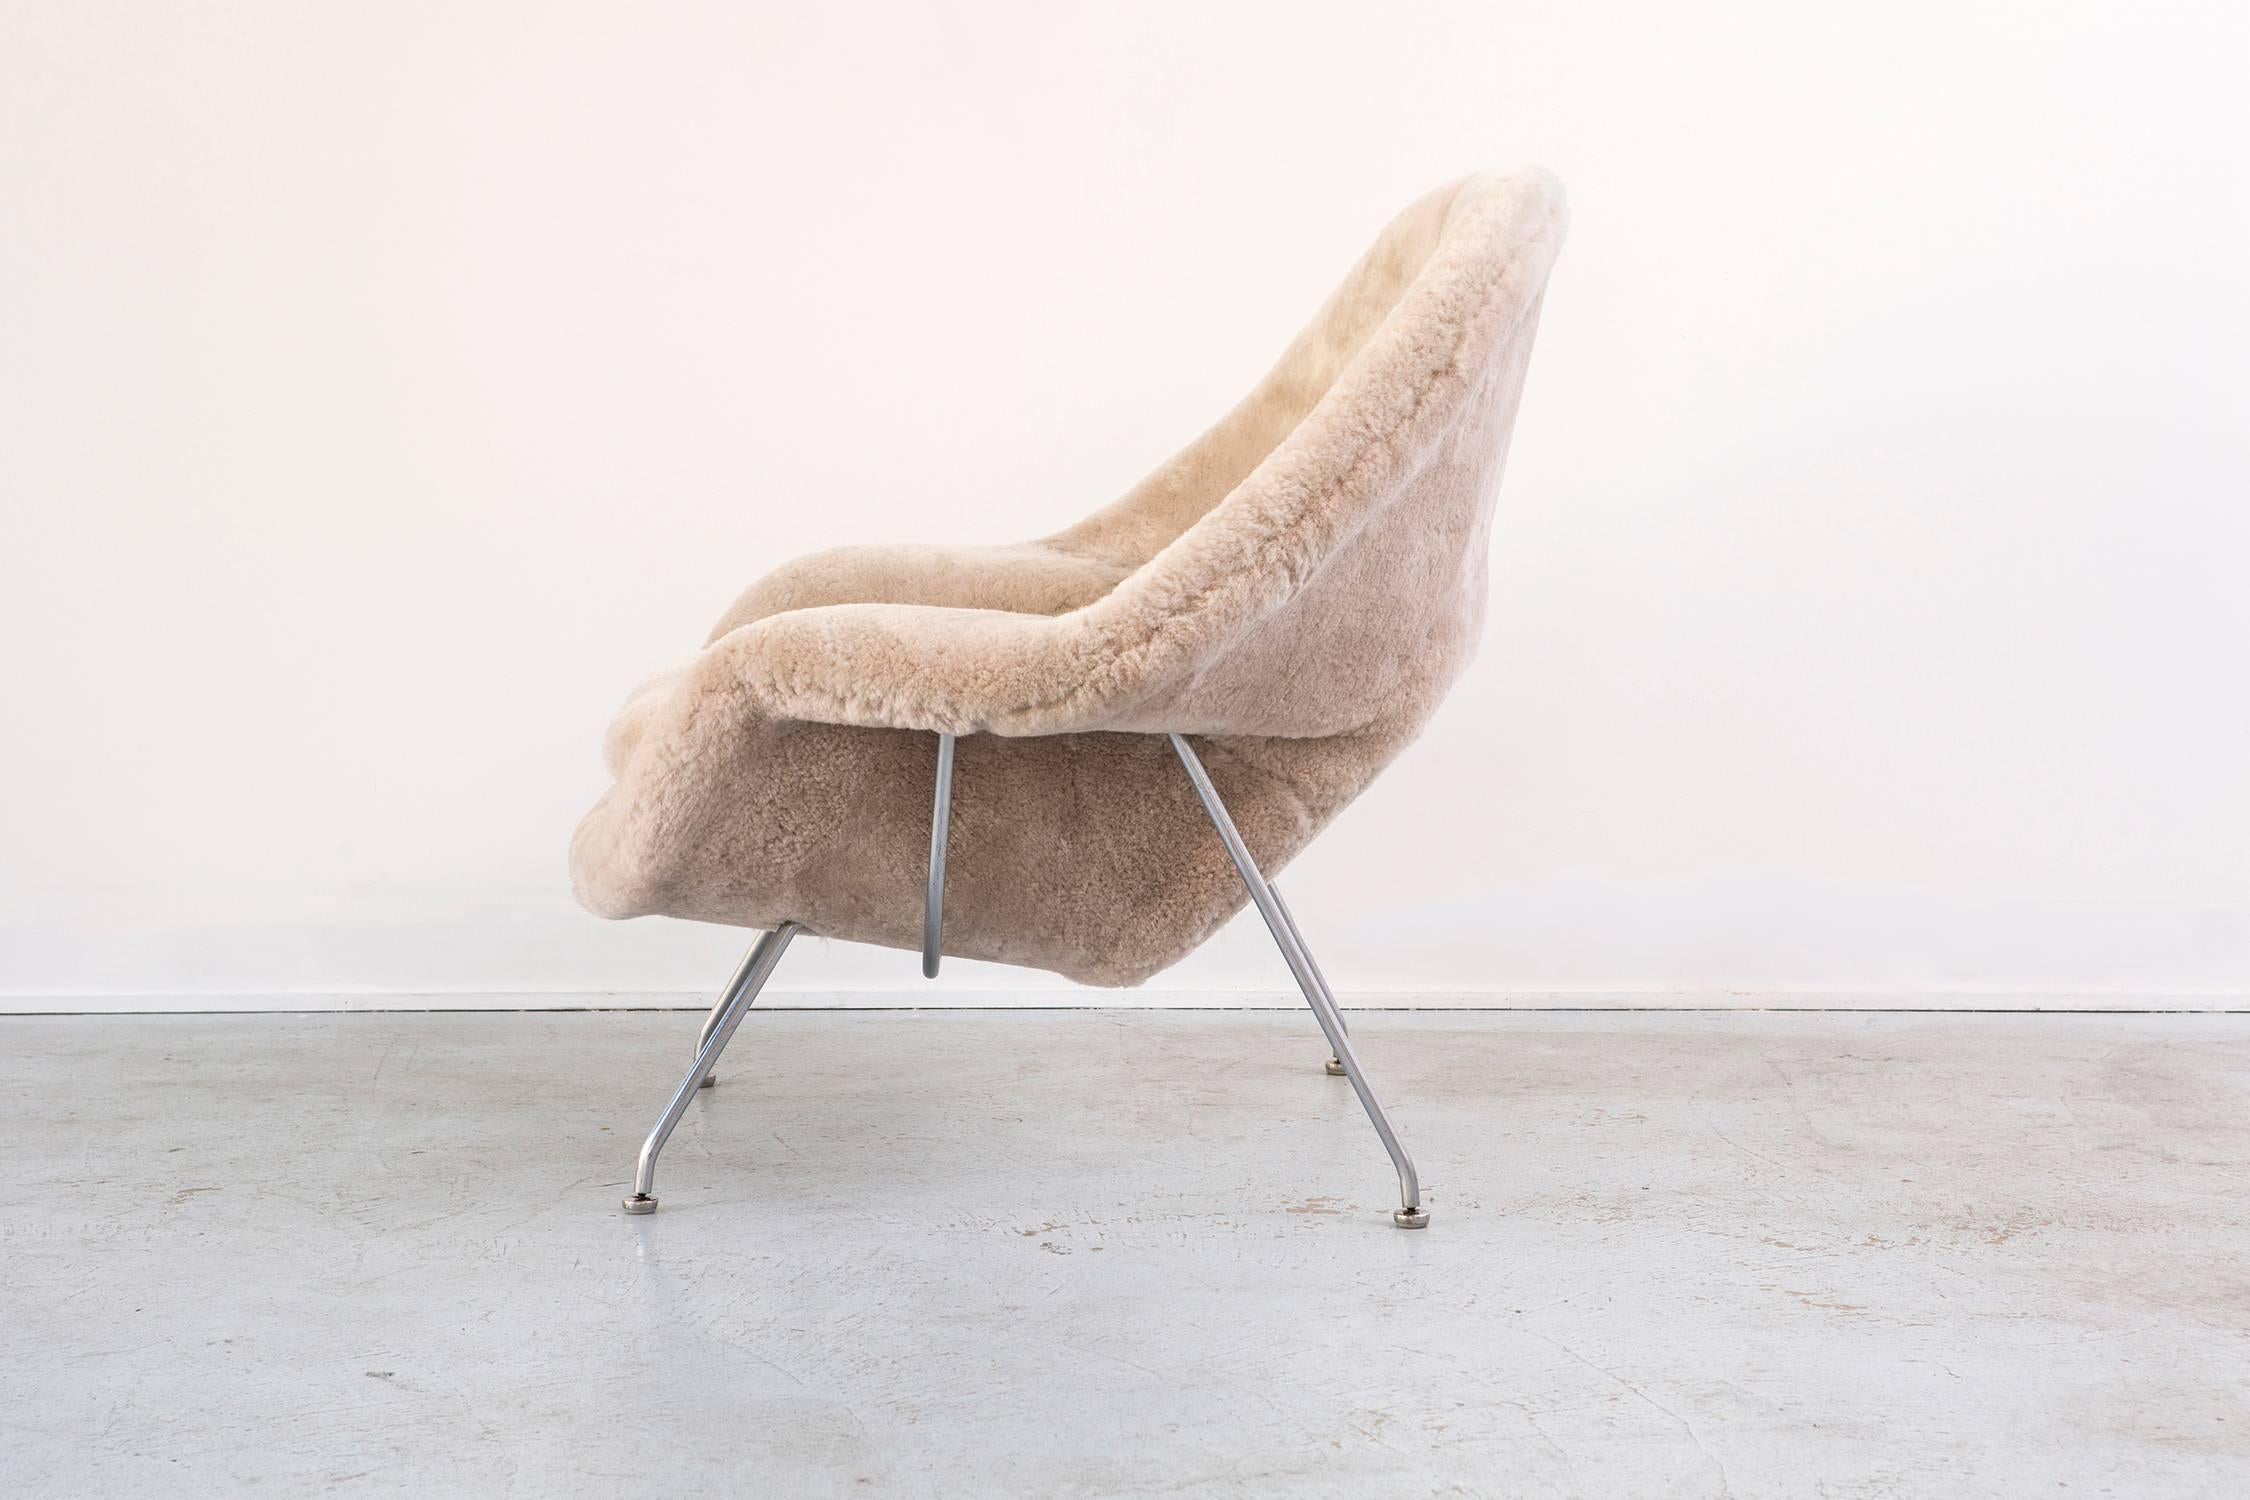 shearling womb chair